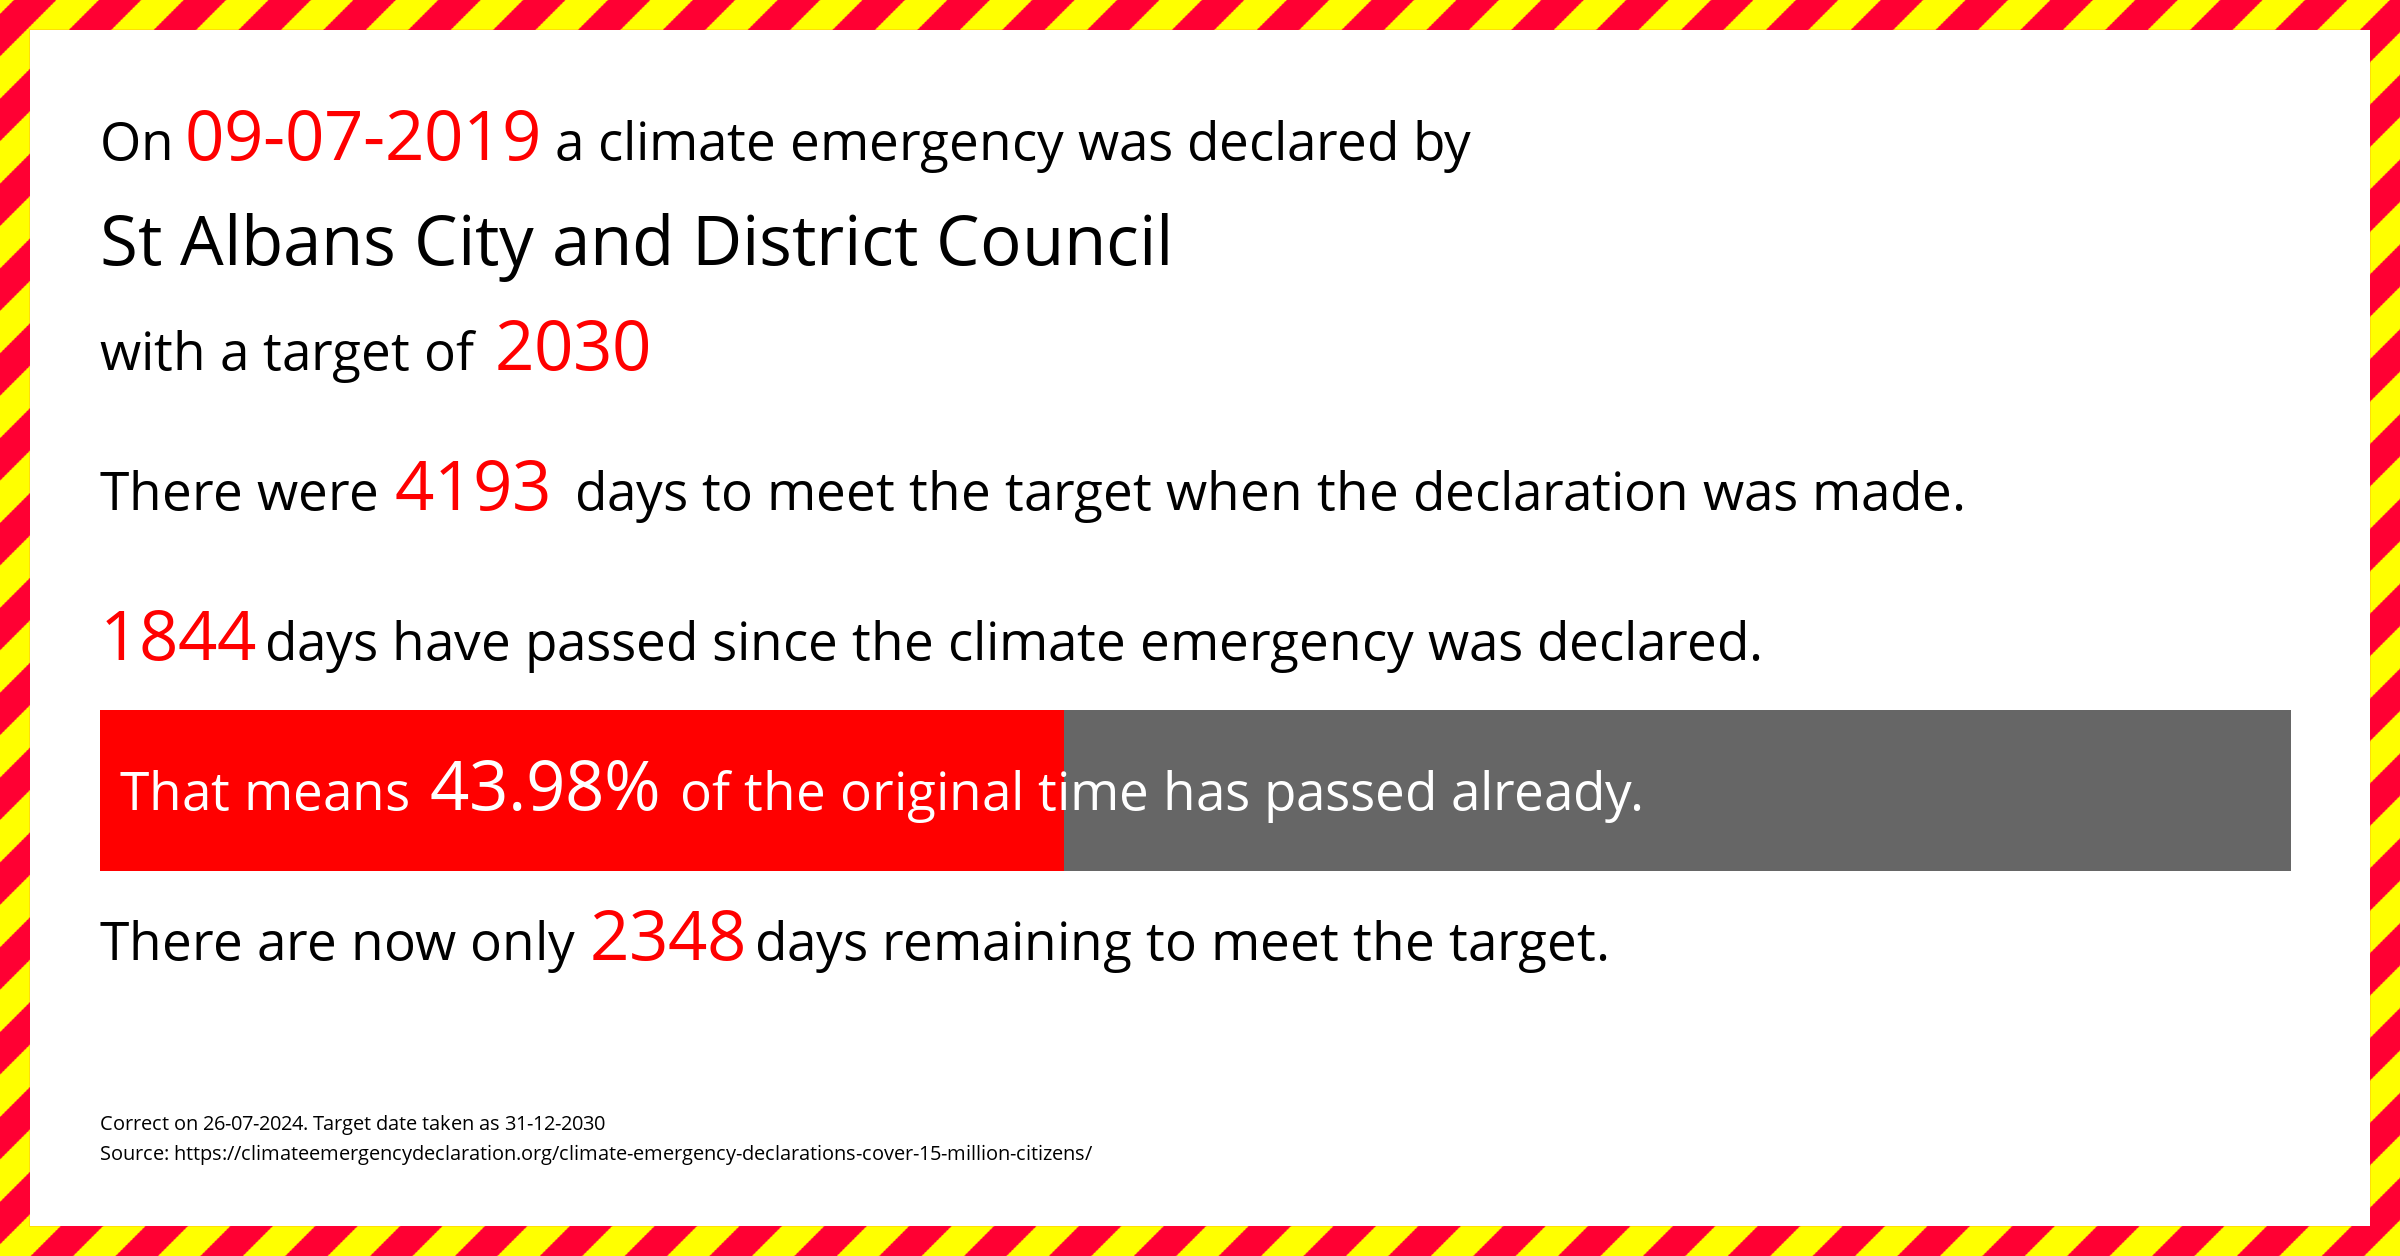 St Albans City and District Council declared a Climate emergency on Tuesday 9th July 2019, with a target of 2030.